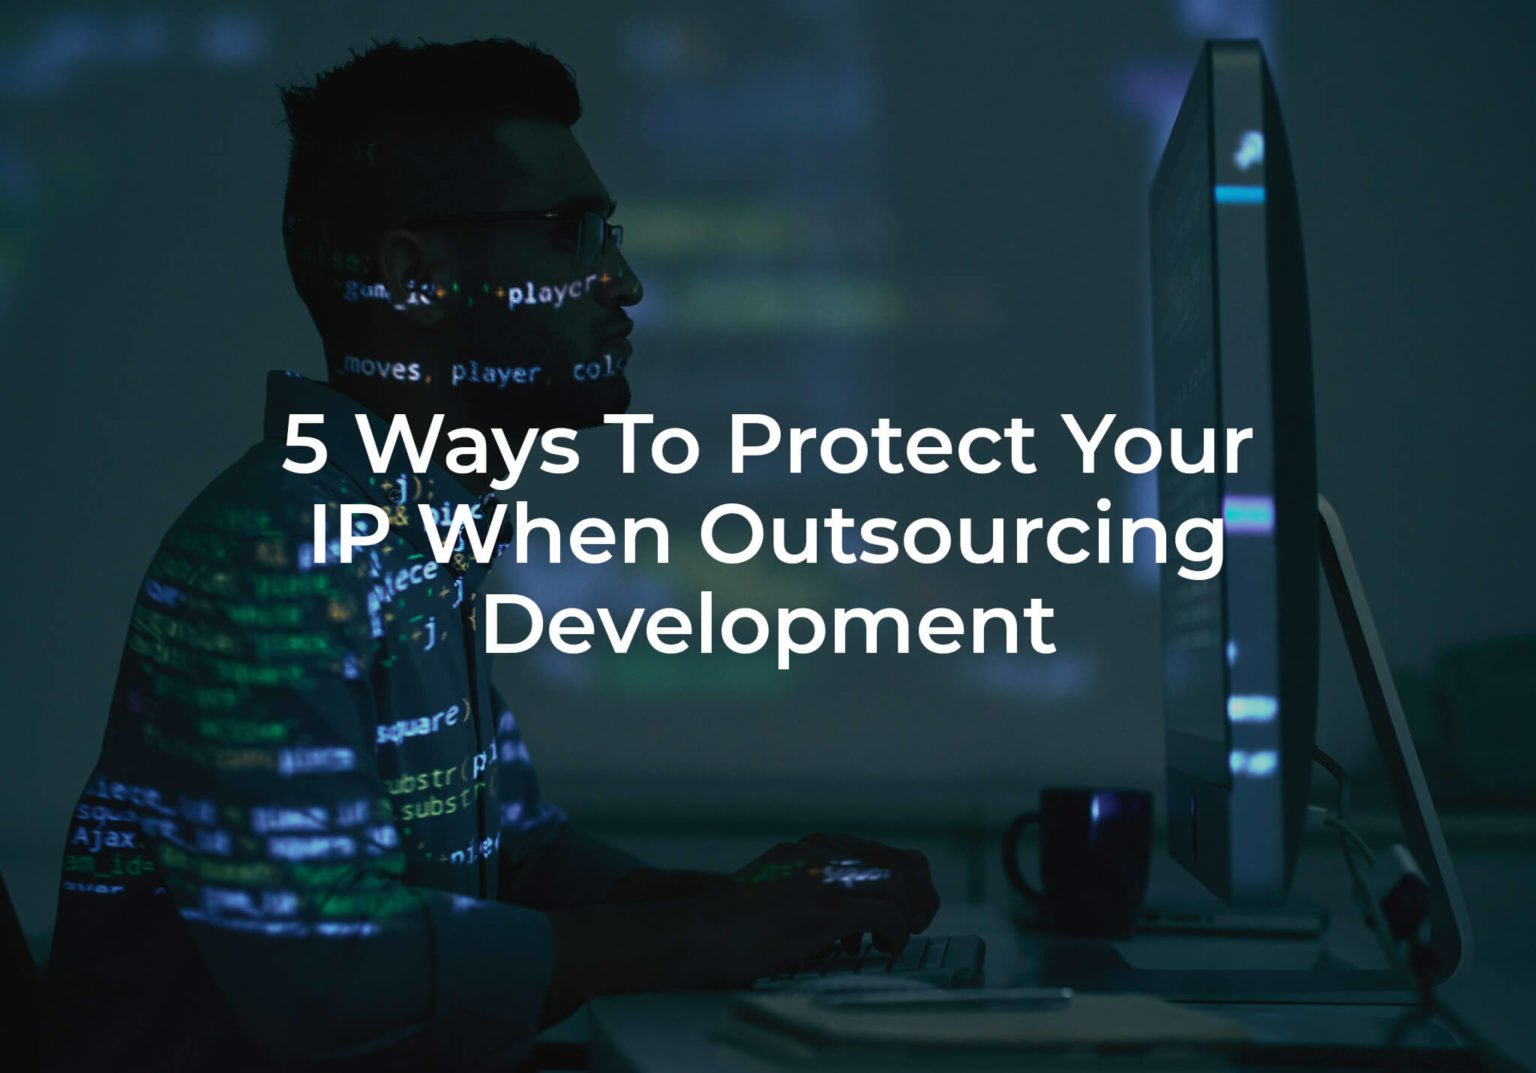 5 Ways To Protect Your IP When Outsourcing Development